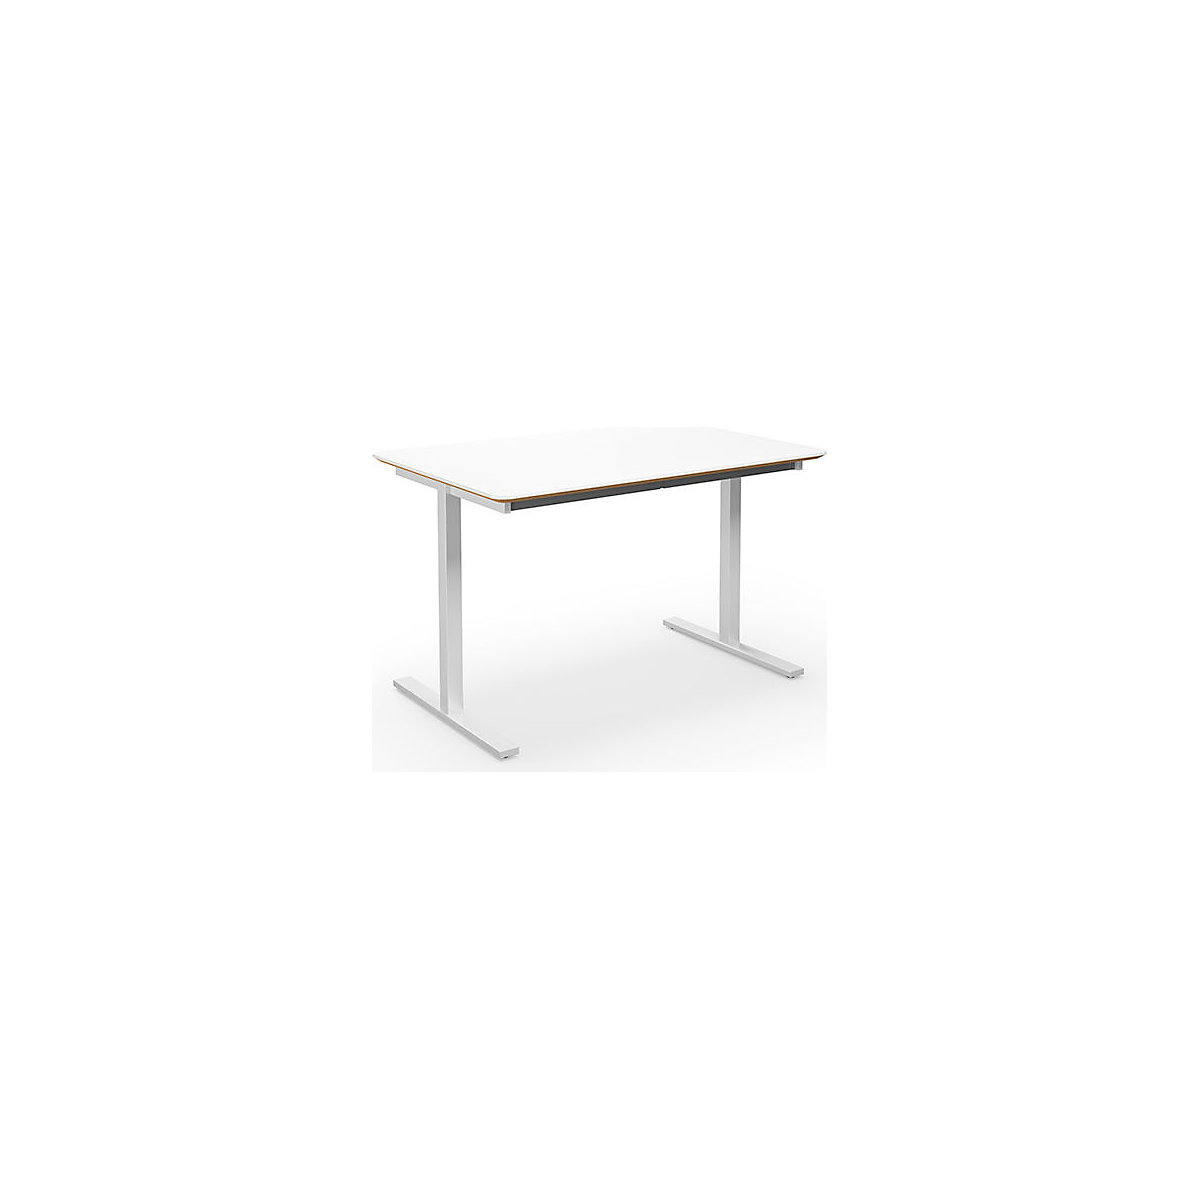 DUO-T Trend multi-purpose desk, straight tabletop, rounded corners, WxD 1200 x 800 mm, white, white-4